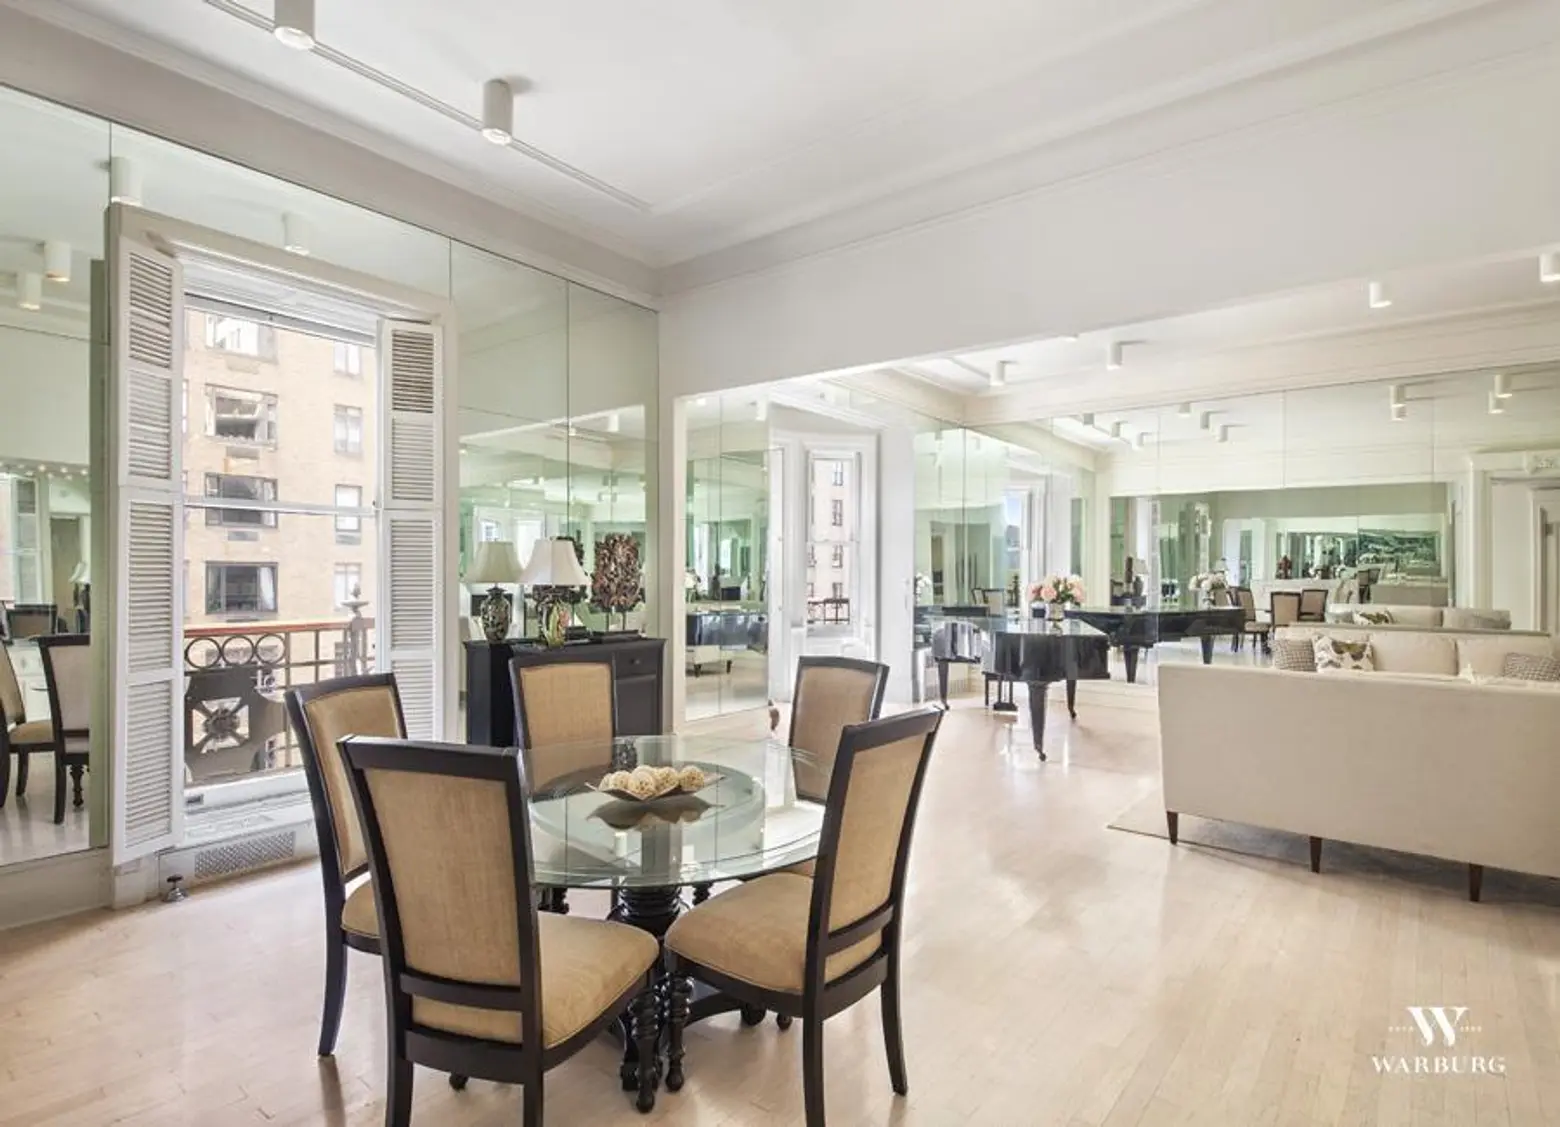 Lauren Bacall's $23.5M Dakota Apartment Finds a Buyer - Curbed NY